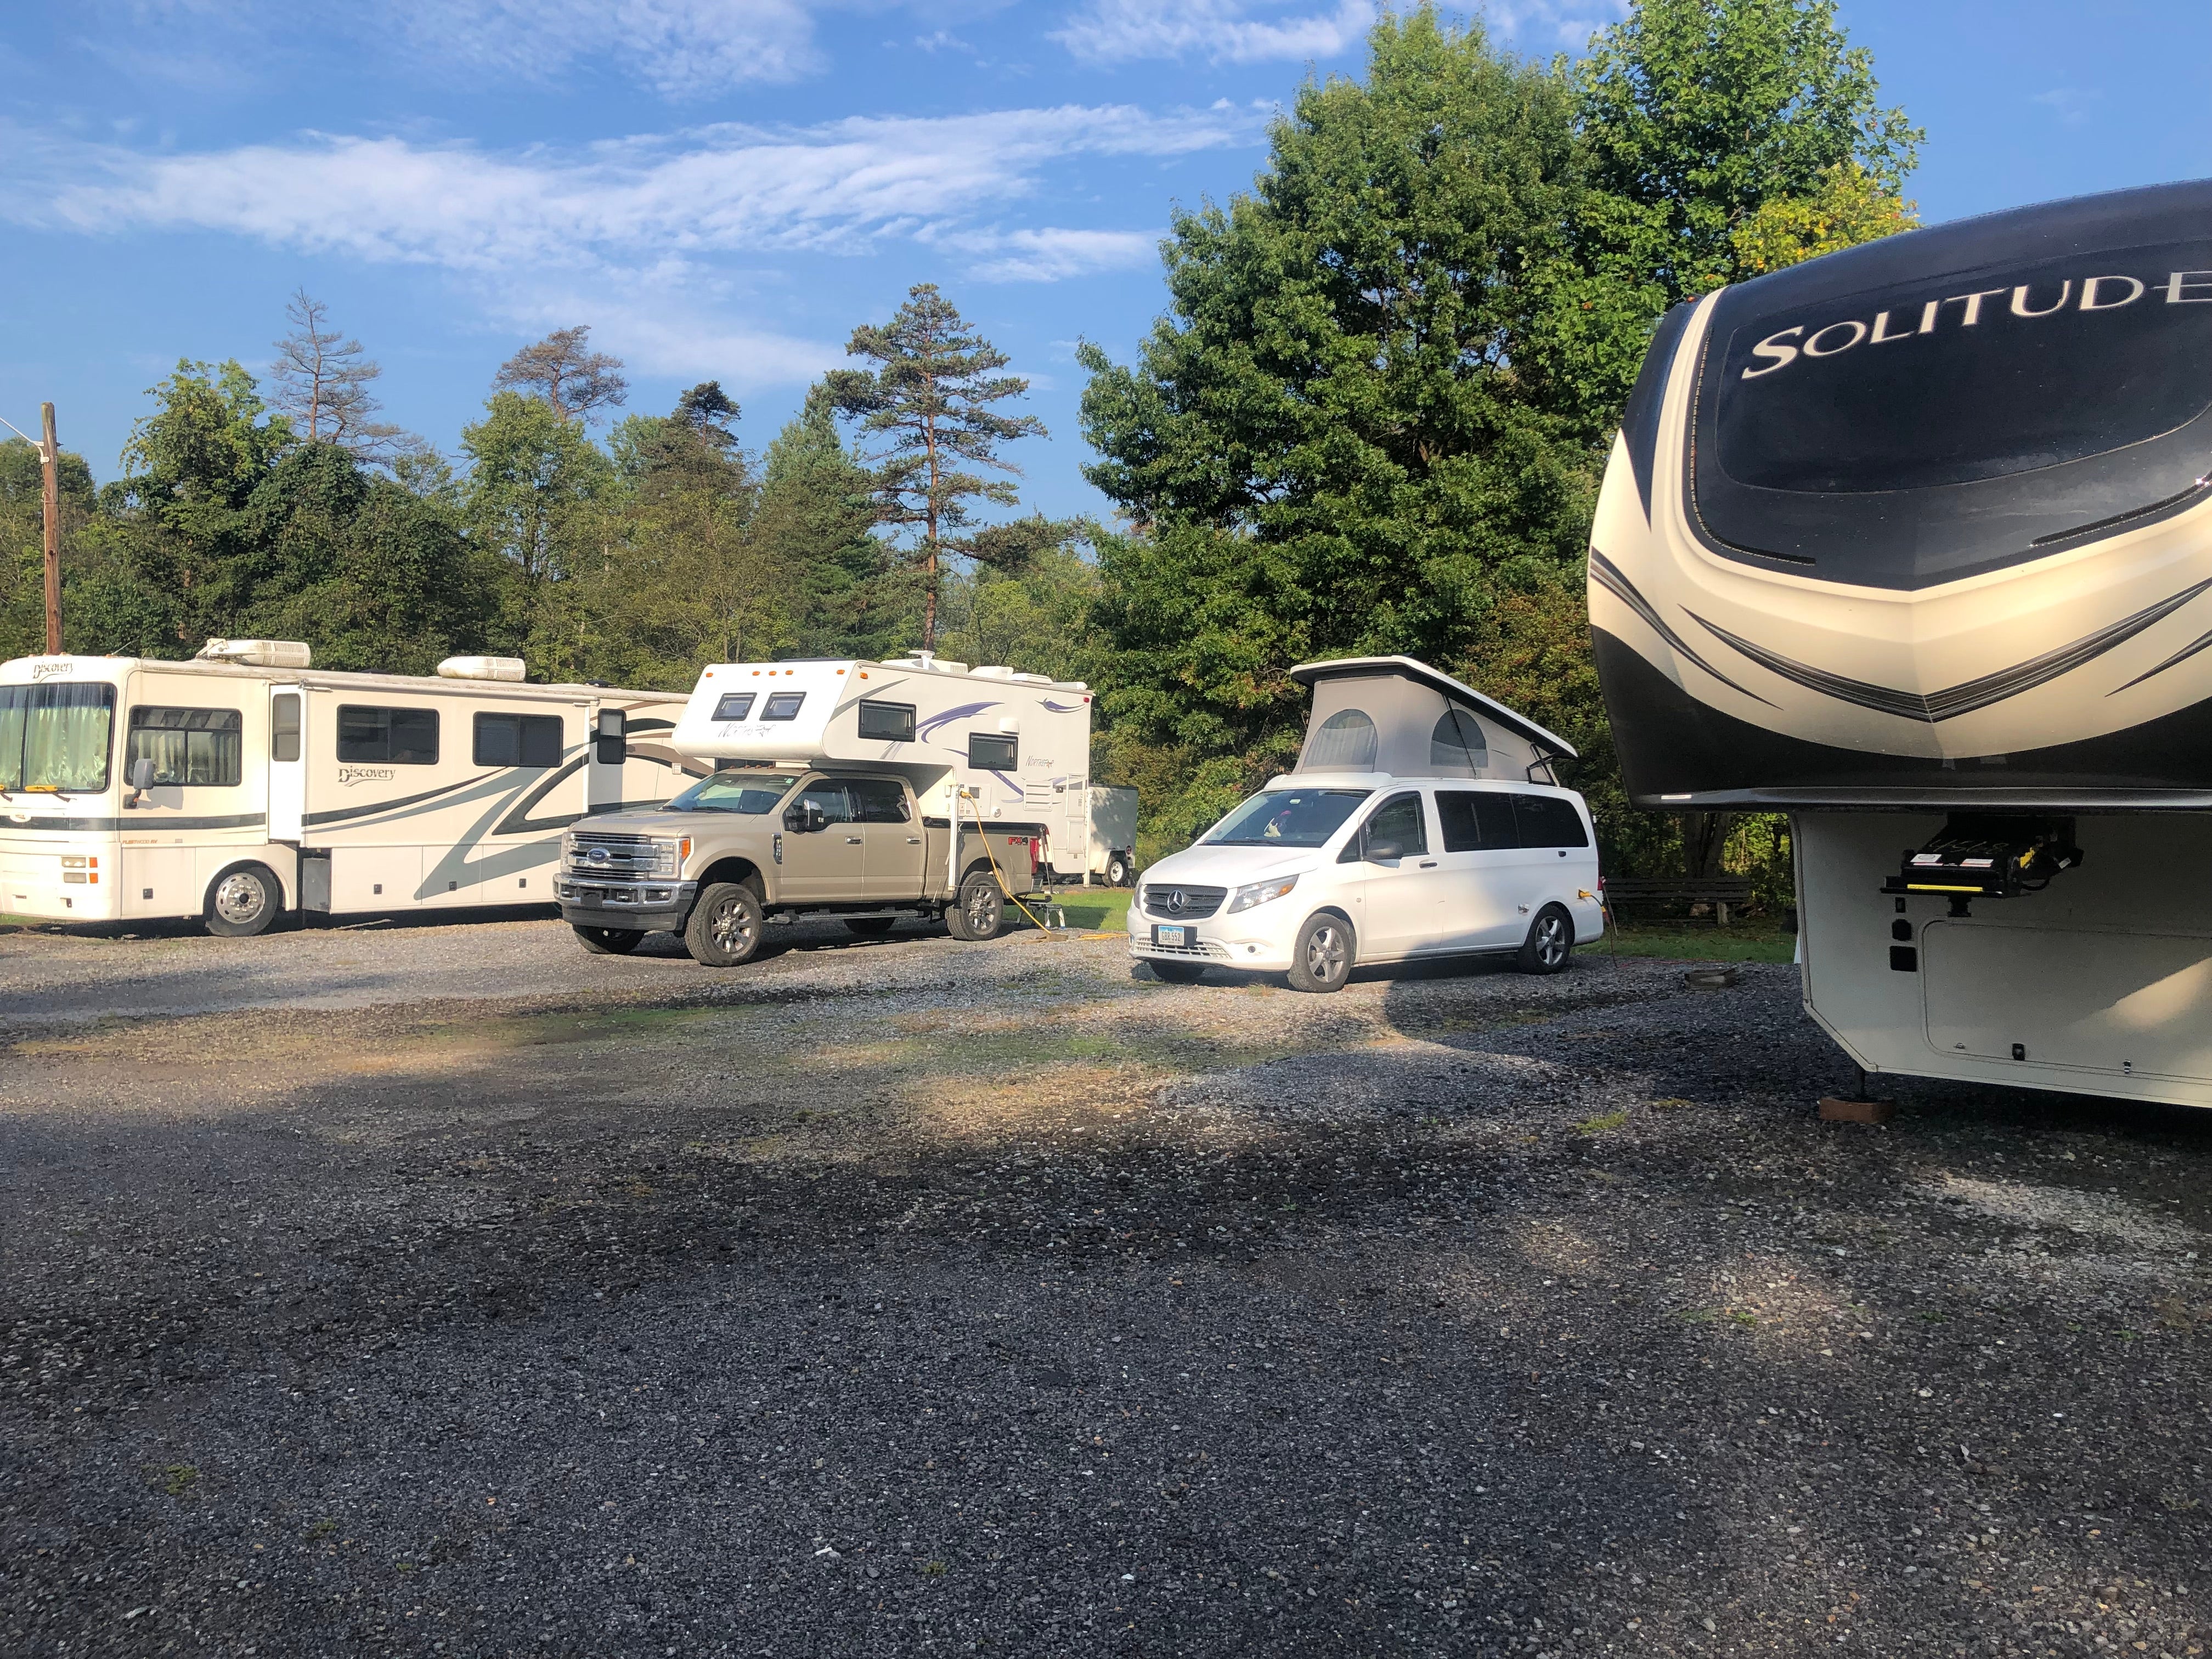 Our tiny van and the truck camper were dwarfed by all the large RVs